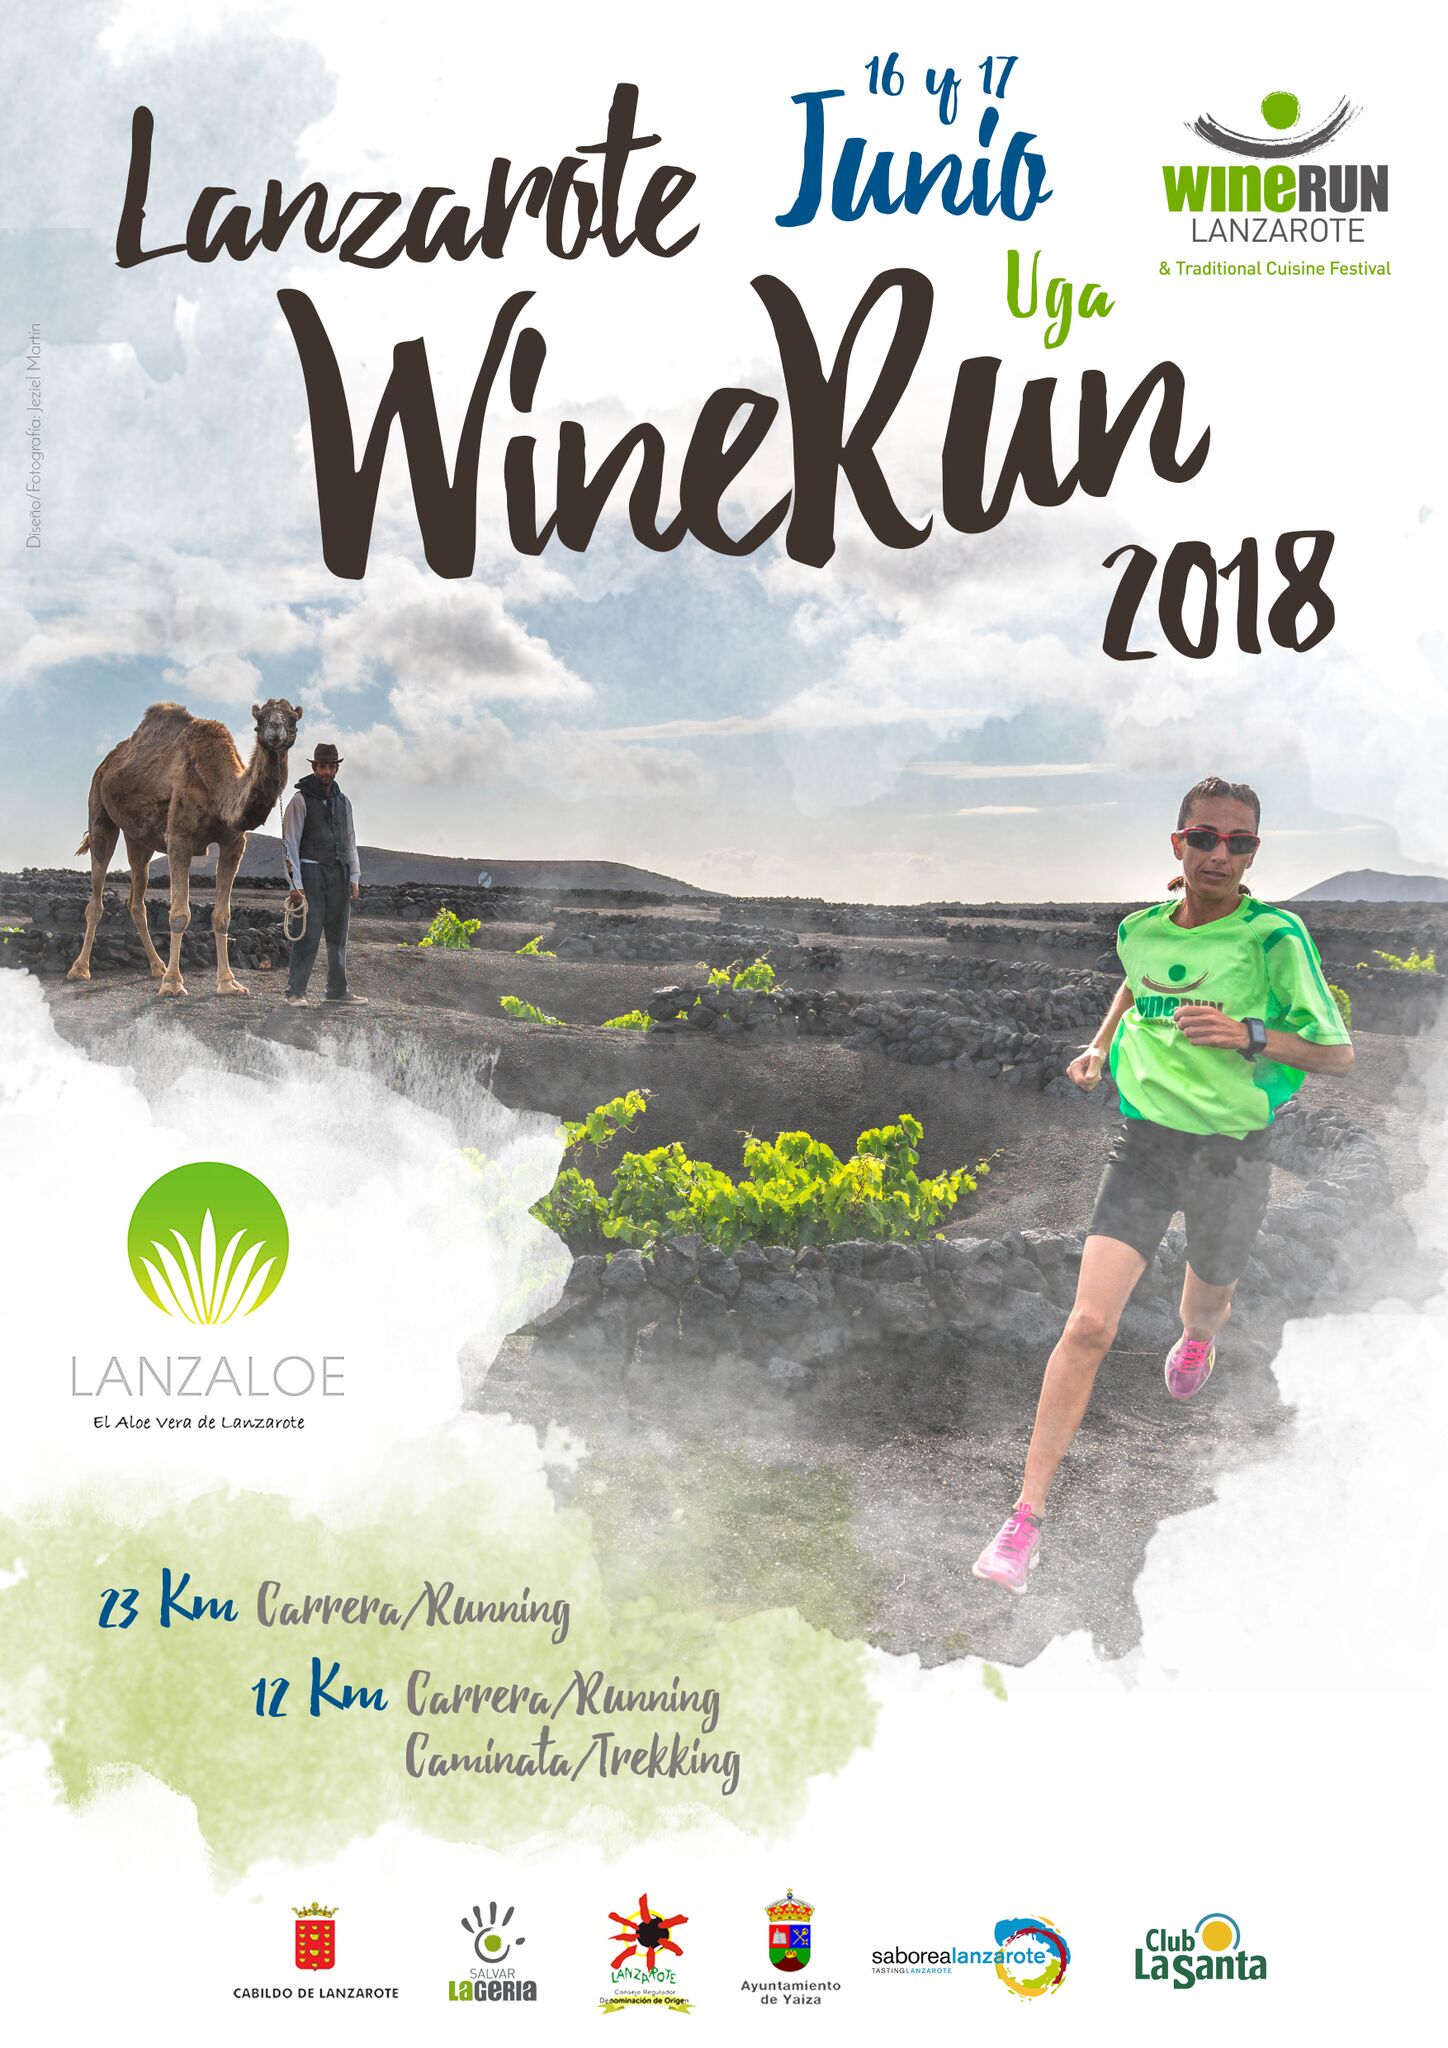 Lanzaloe will be one of the sponsors of the Wine Run race